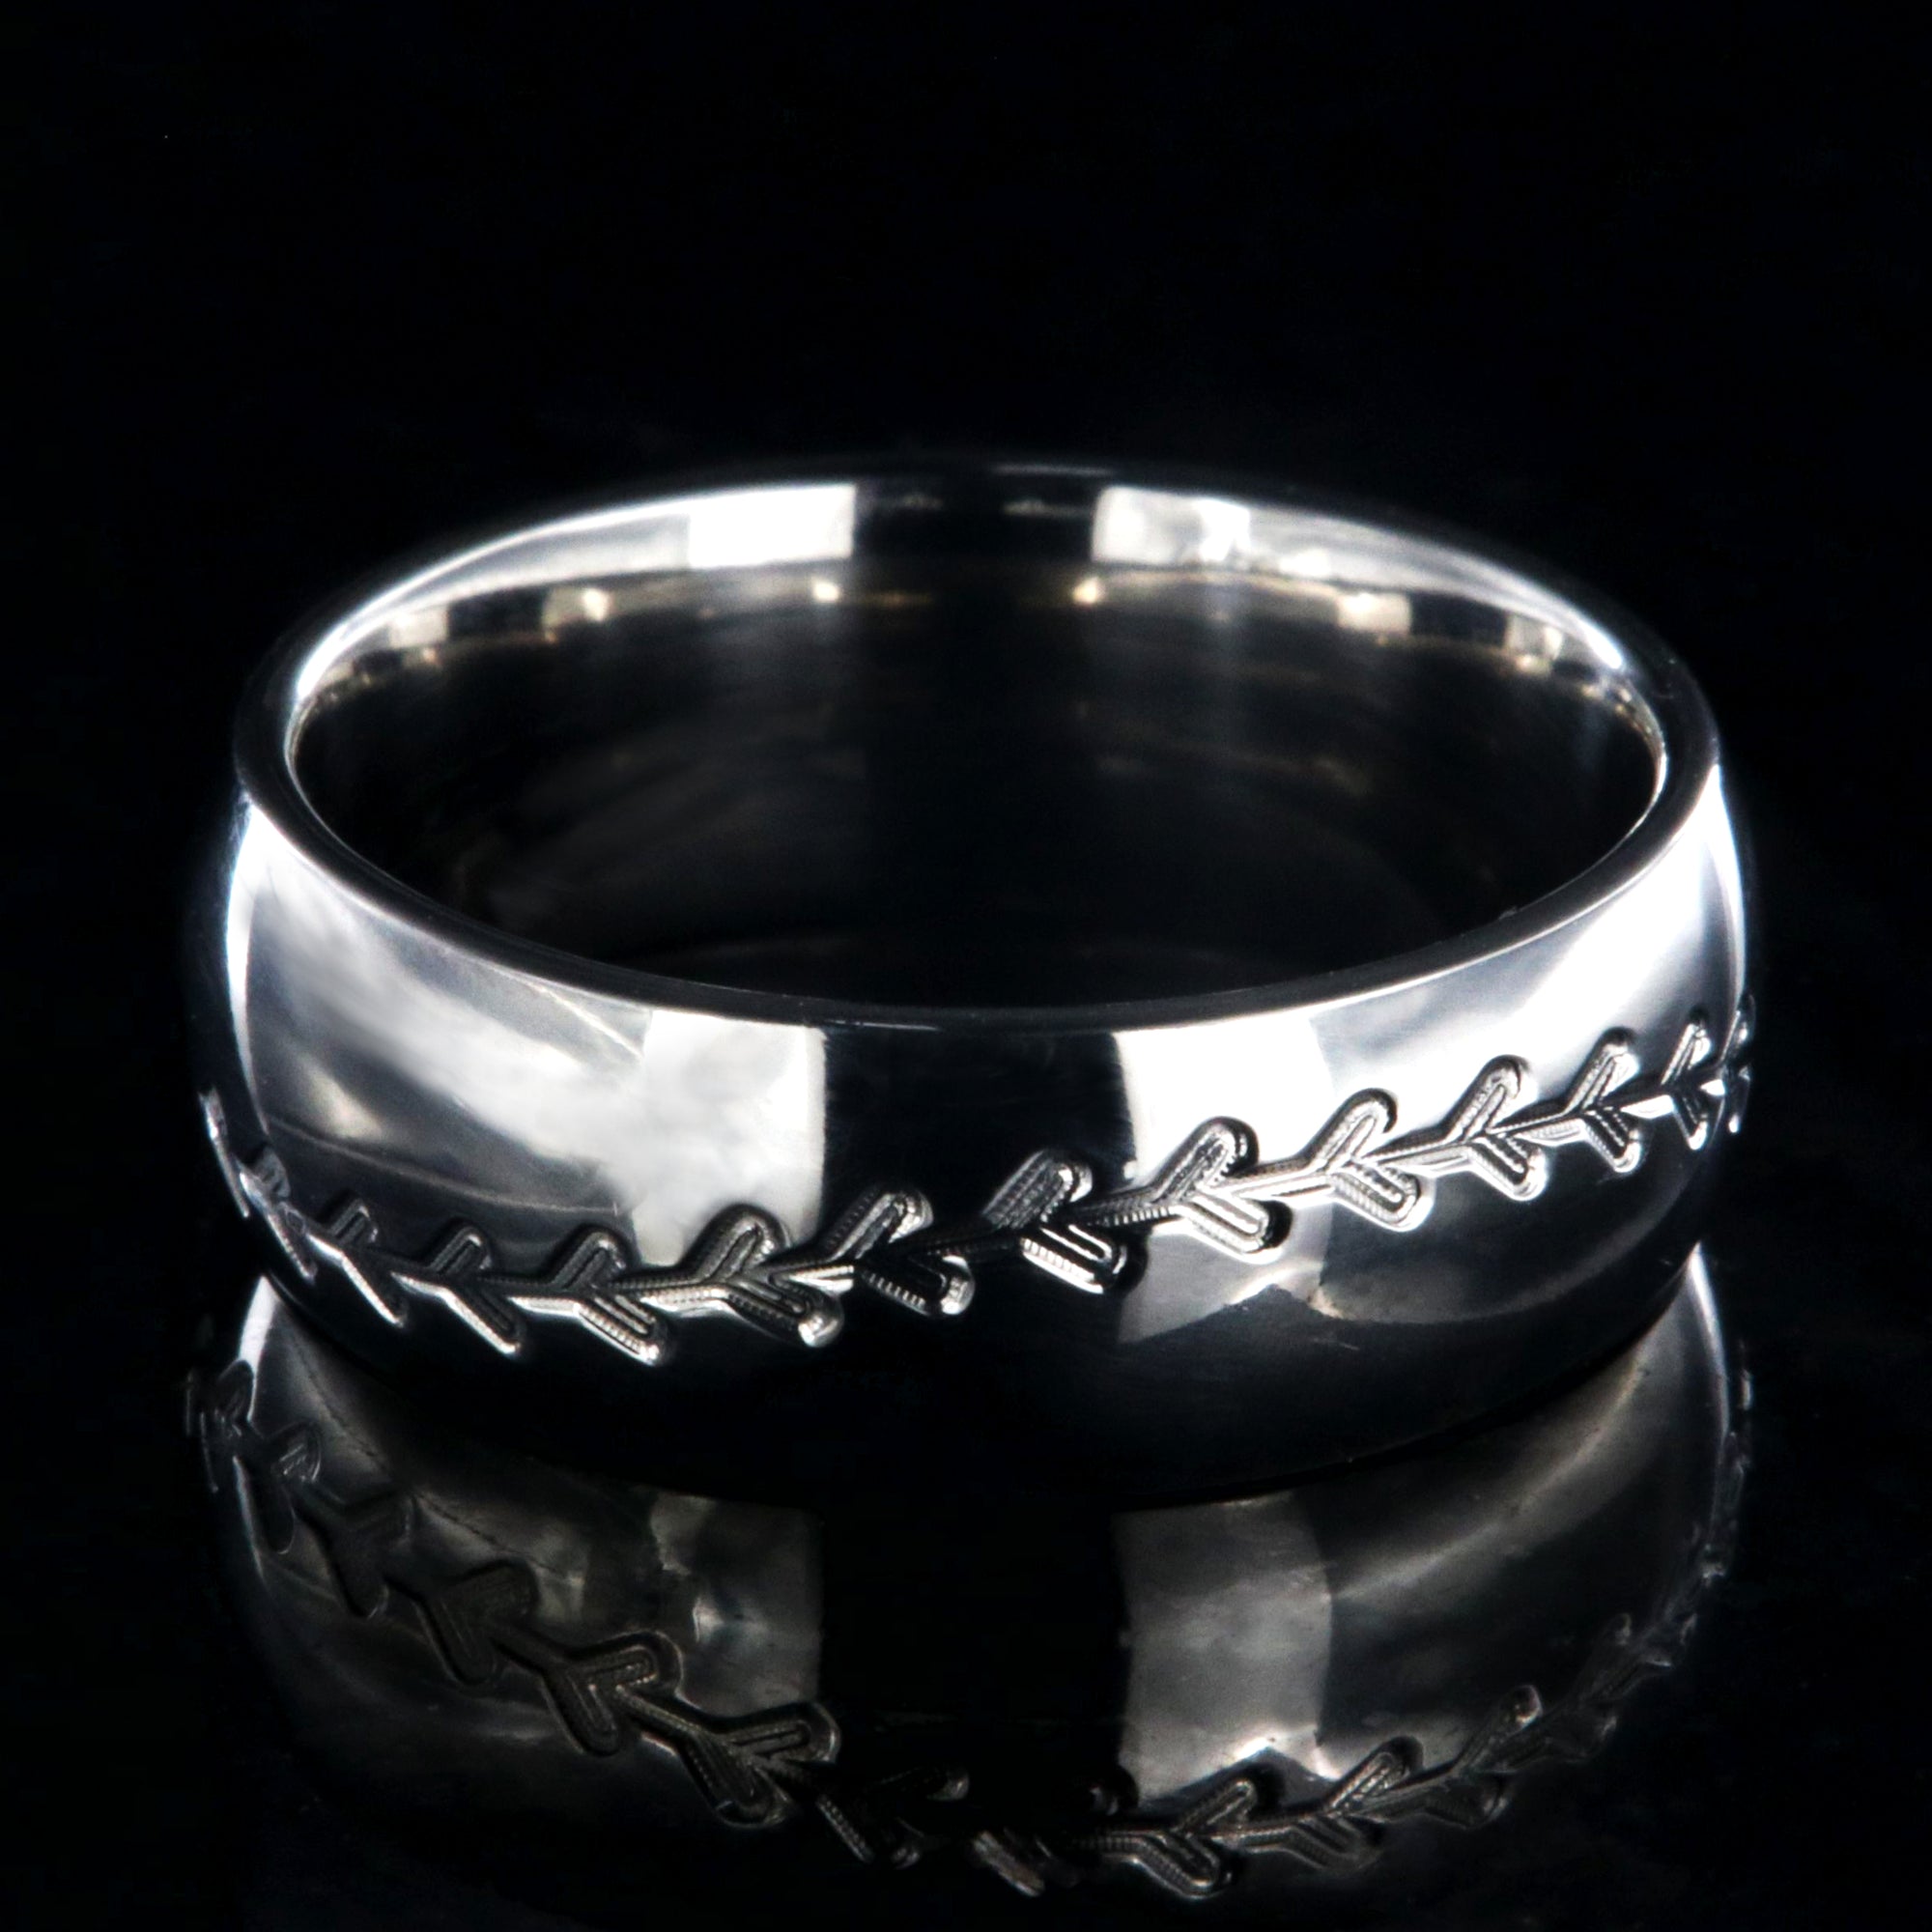 8mm wide titanium baseball ring with milled stitching and a rounded profile